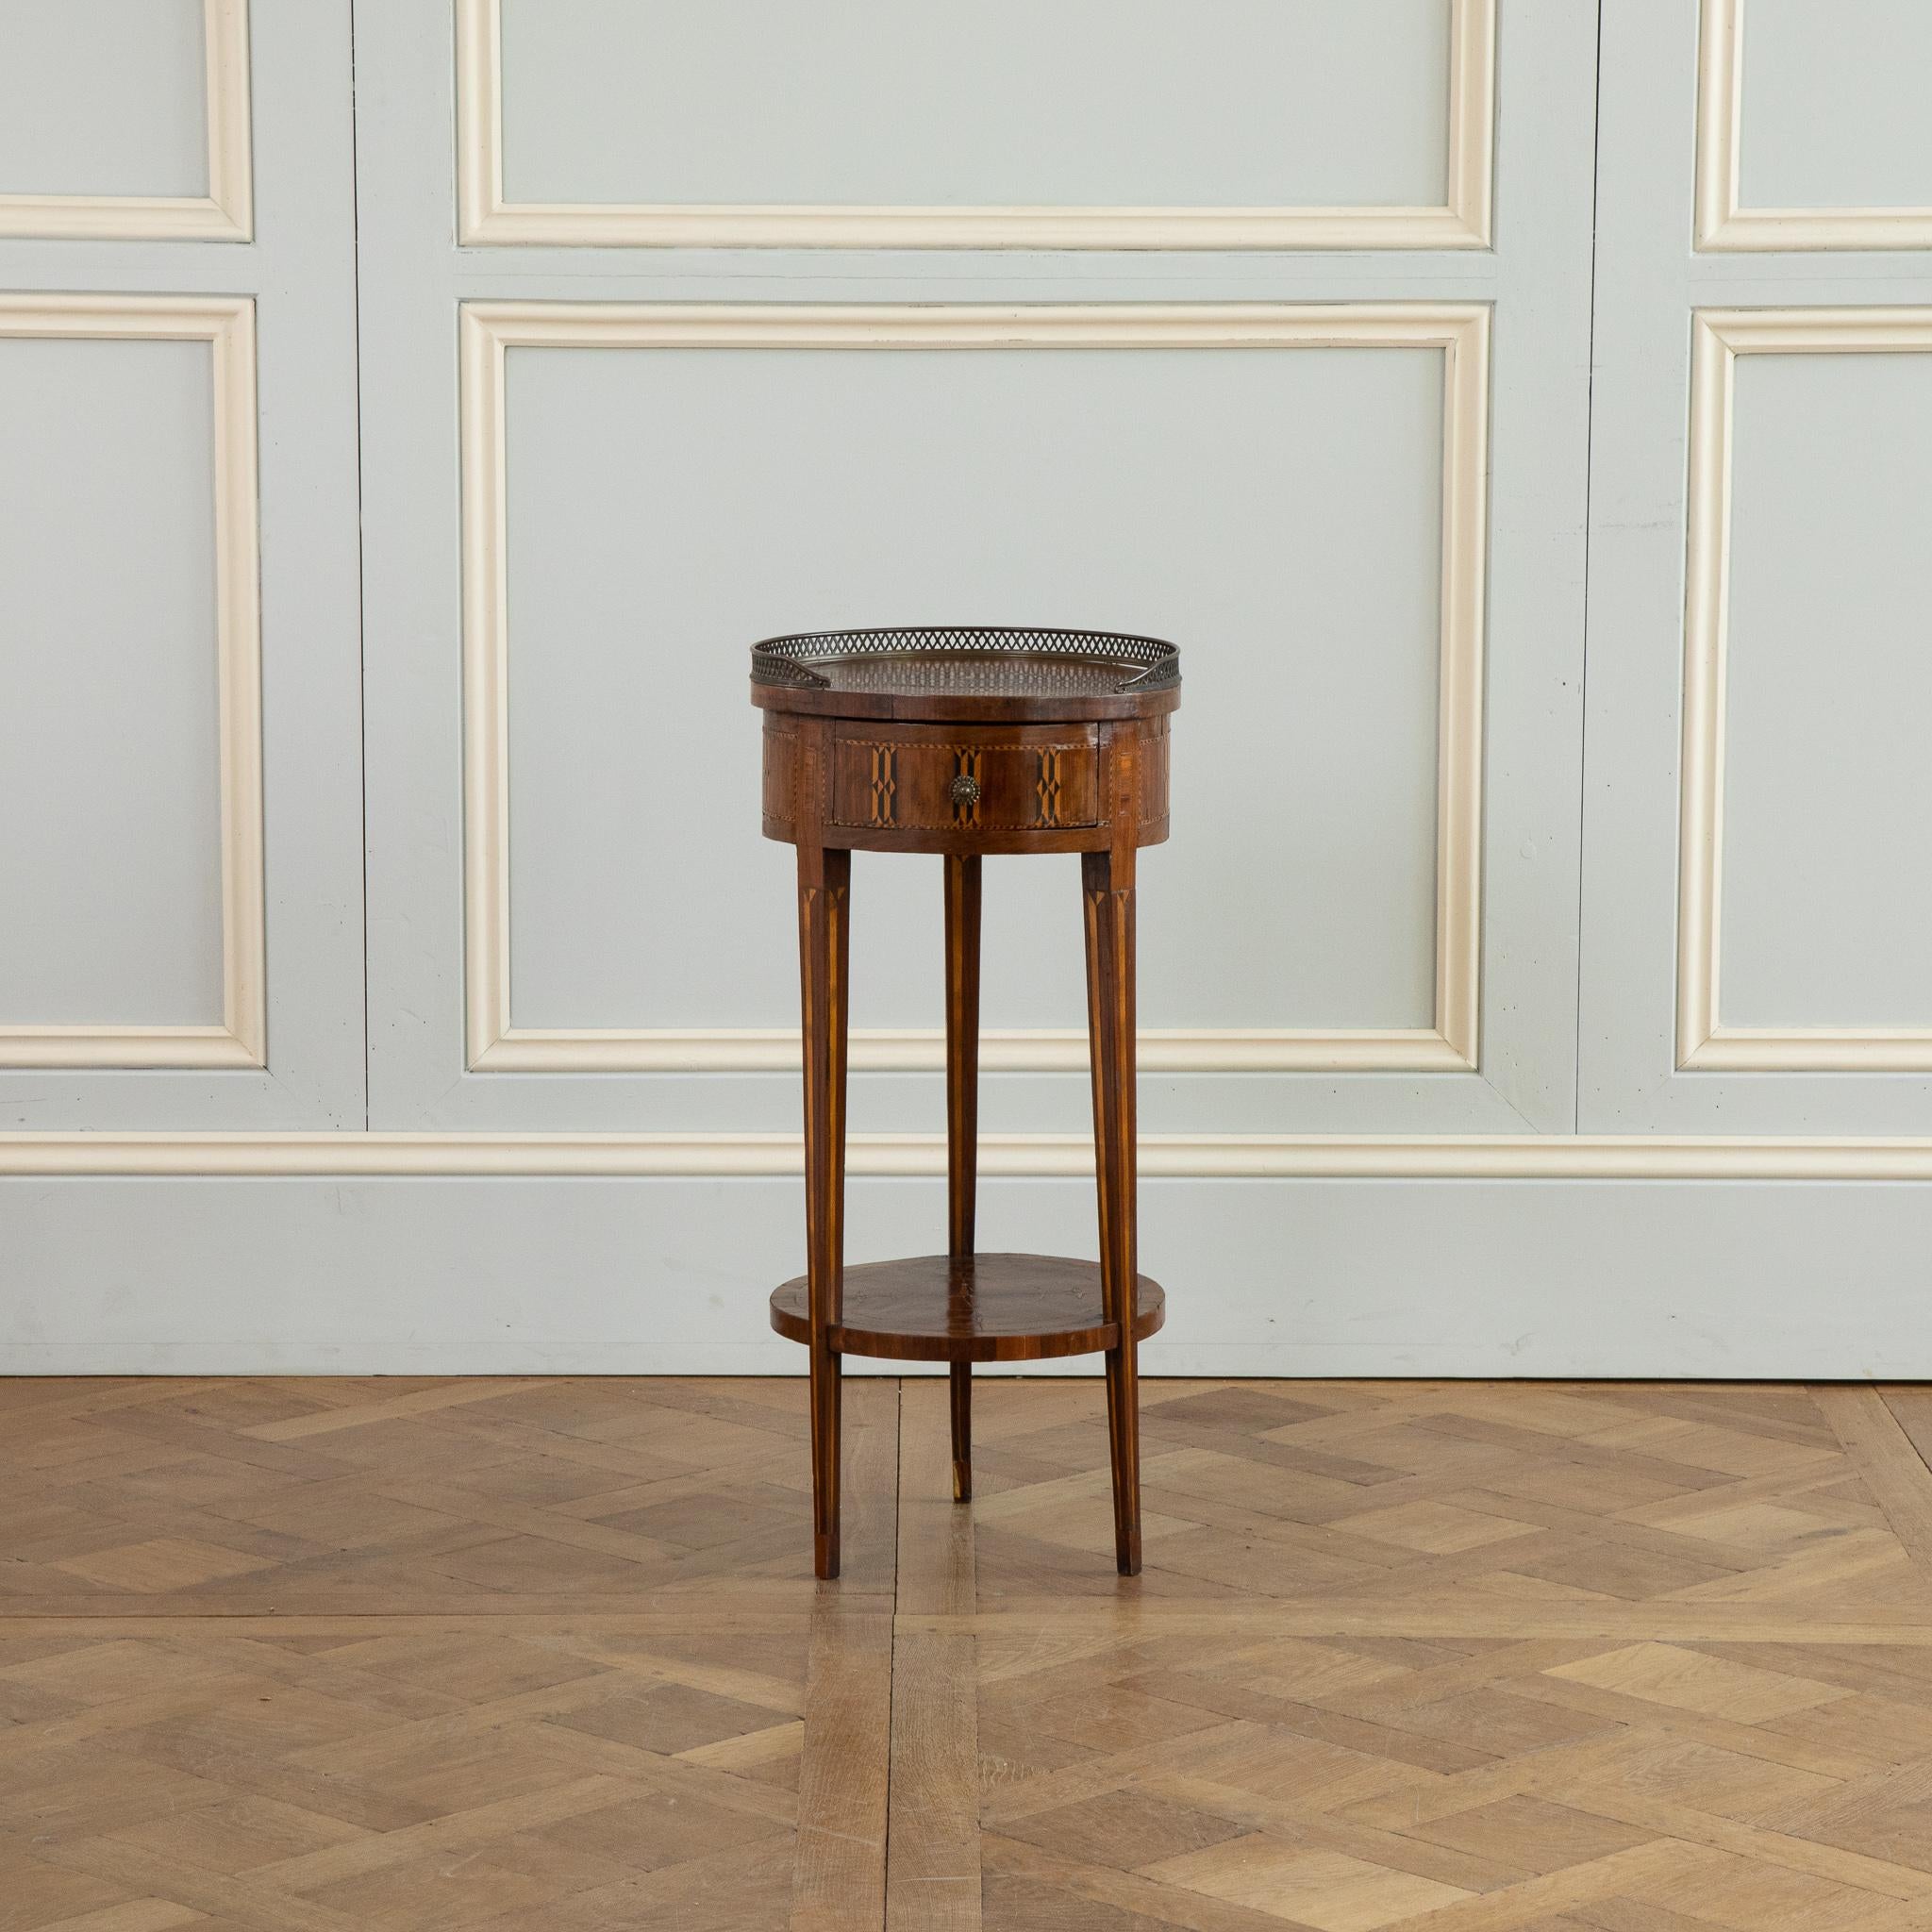 Late 19th Century Marquetry side table 
sitting on 3 tapered legs
Marquetry's work depicts Stars all around
bottom shelve with marquetry work also
the top is surrounded by a pierced bronze gallery.